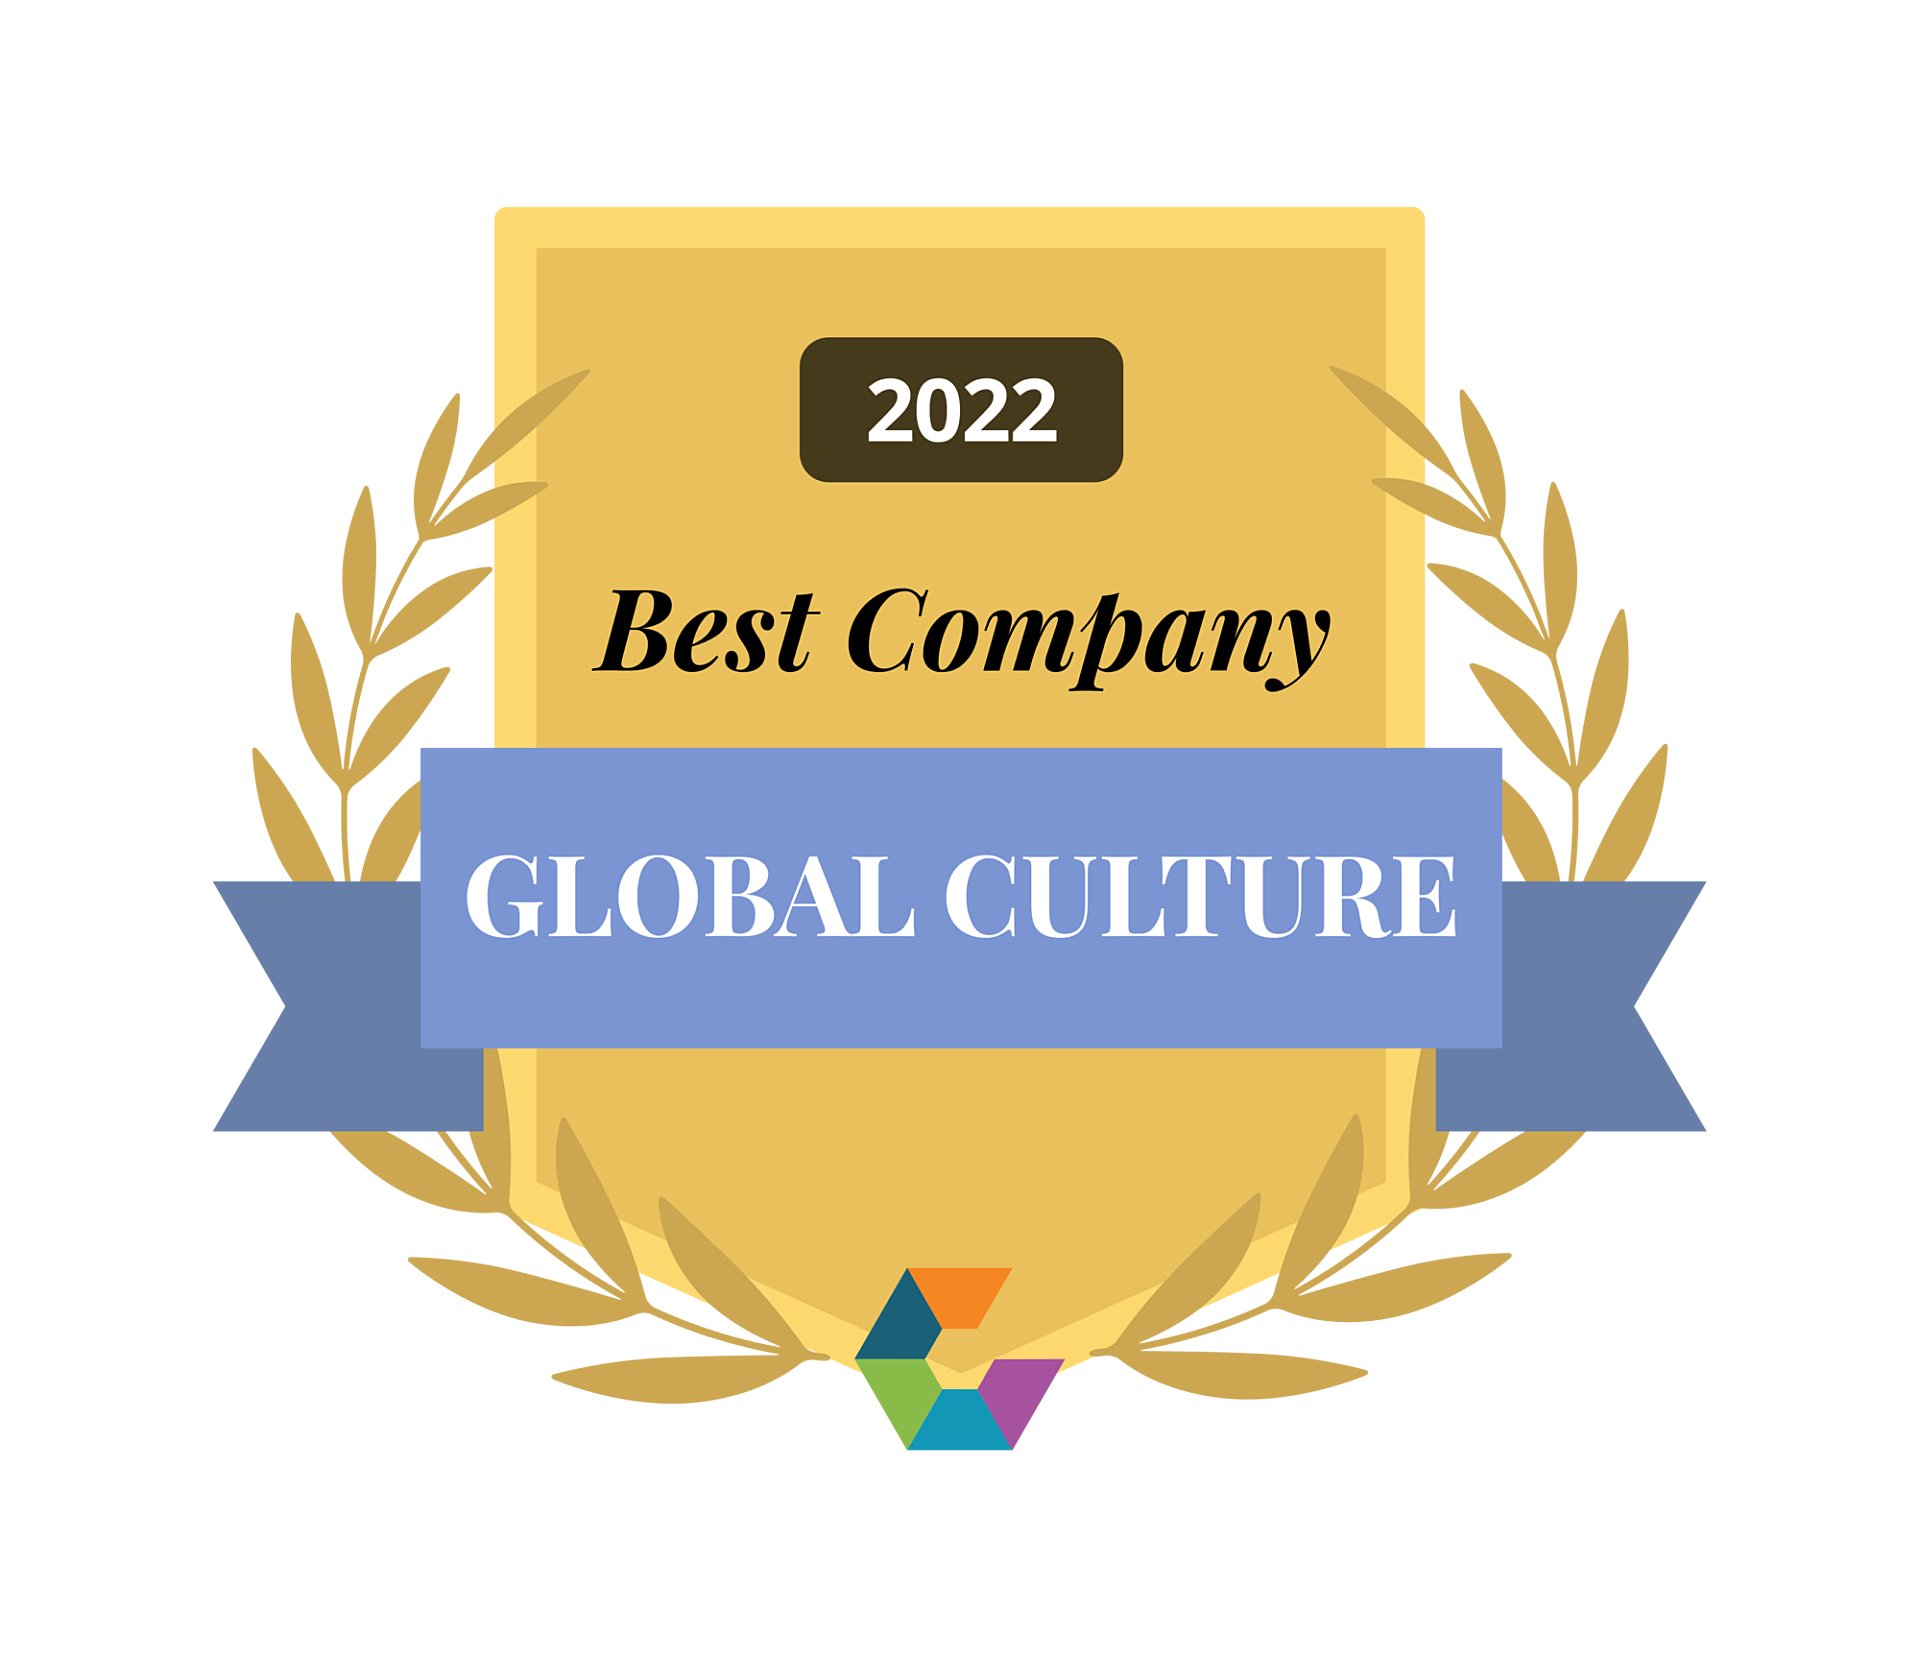 Comparably Award Best Global Culture